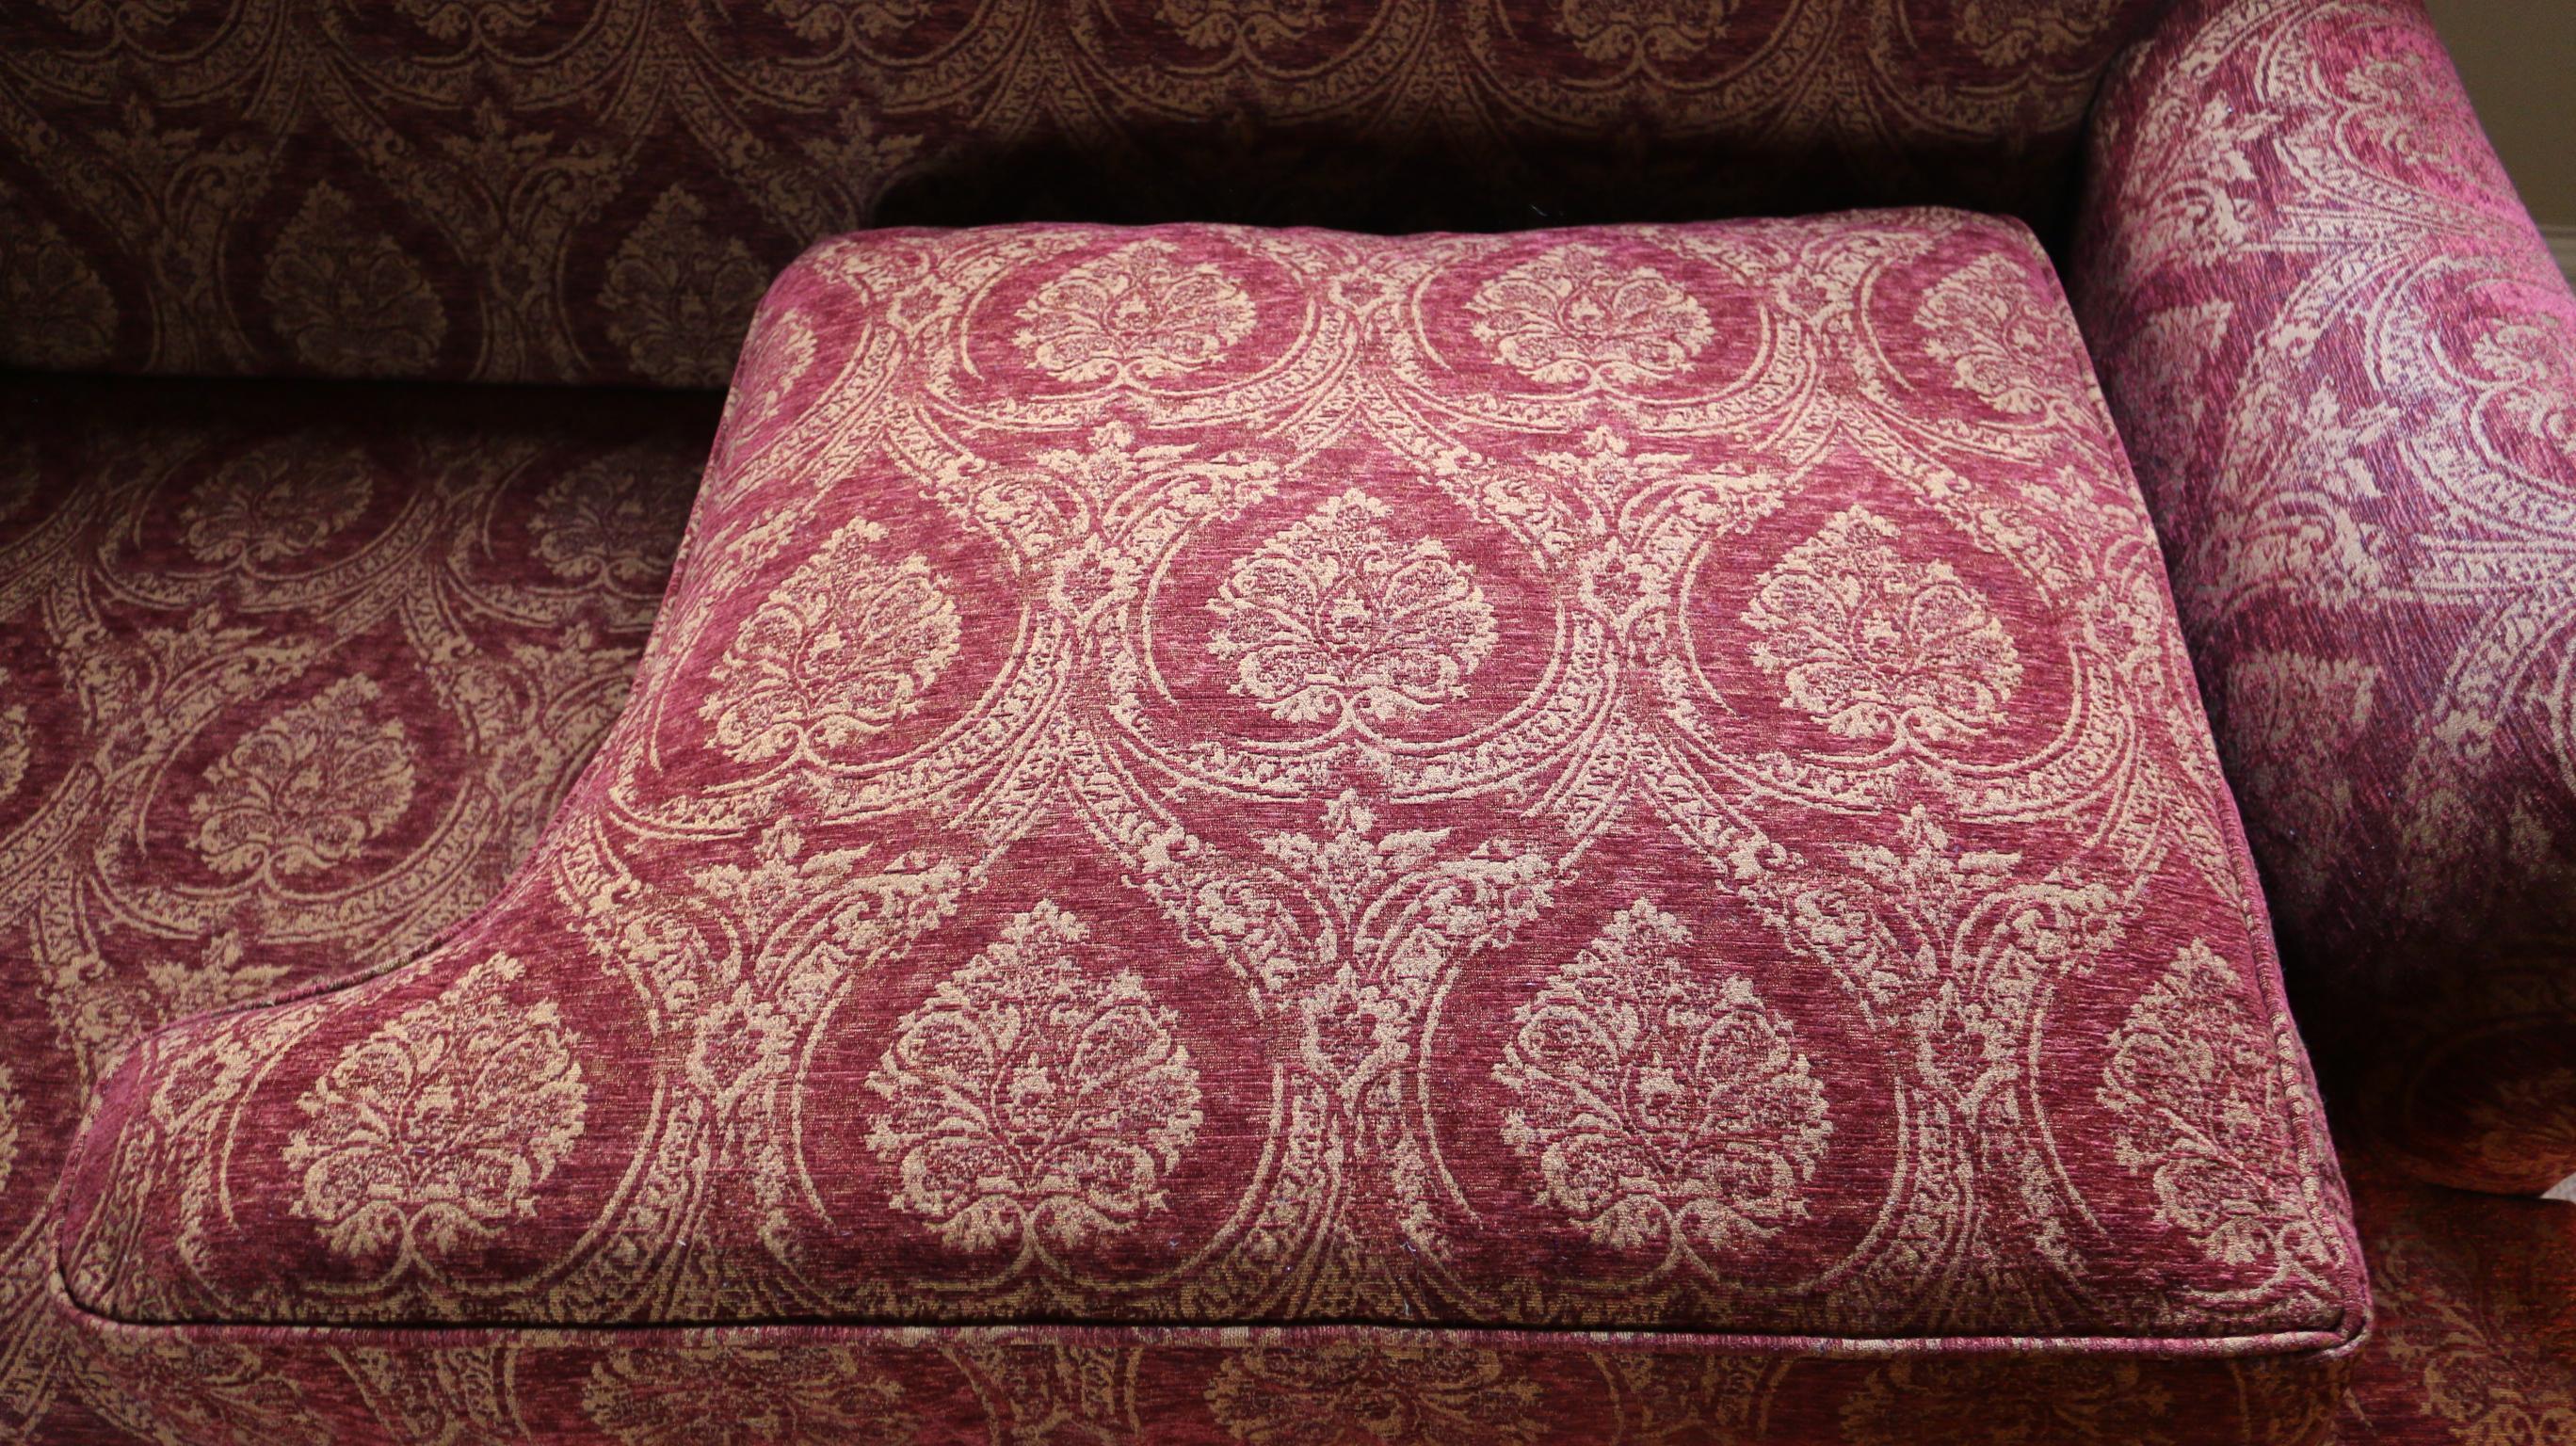 Late 20th Century Settee Sofa Pair of 3-Seat Howard Parker & Farr Red-Wine Gold Mulberry Paisley